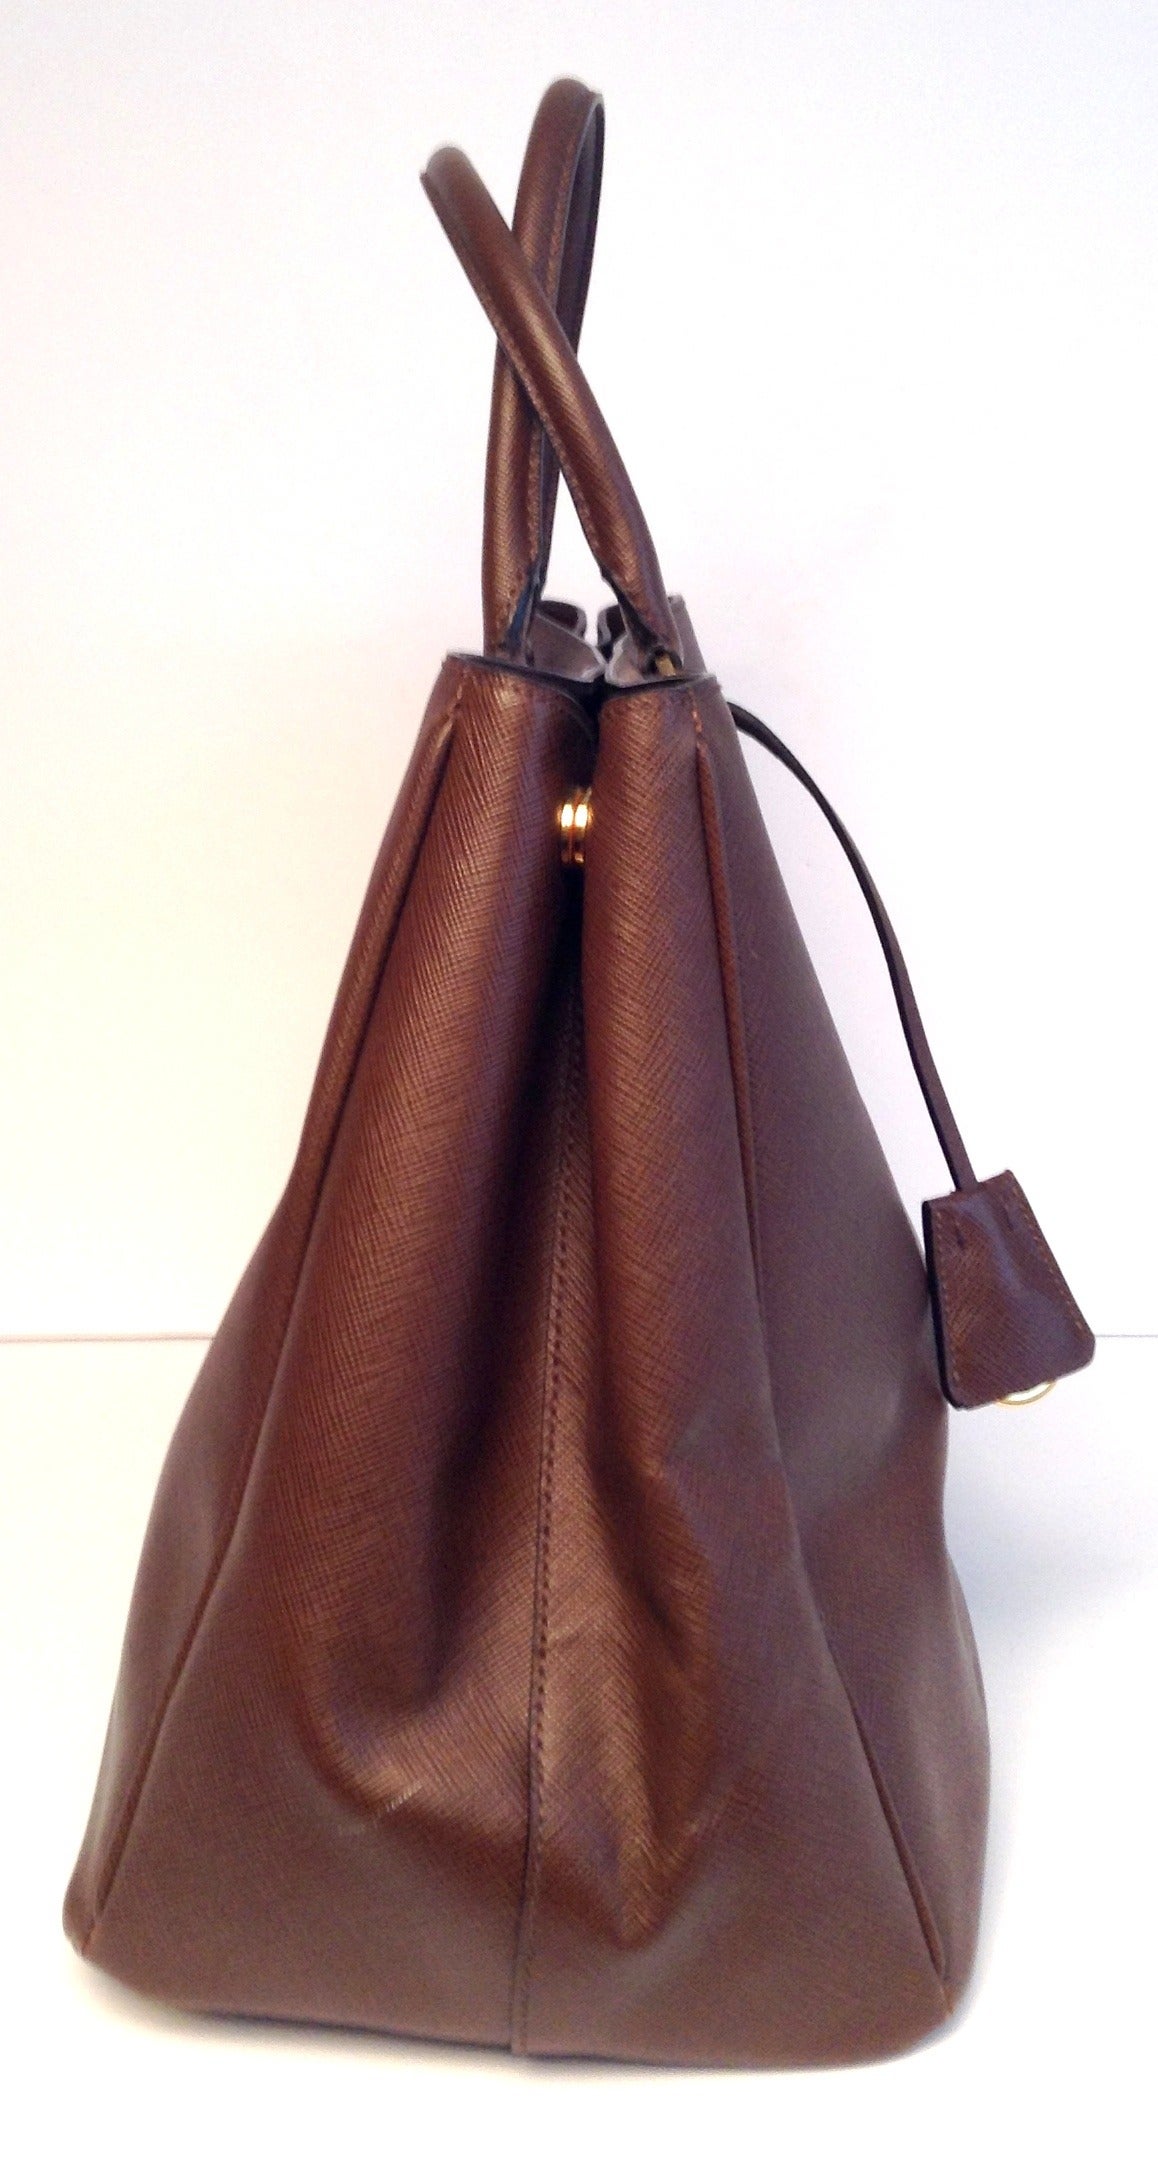 This is an authentic PRADA Saffiano Lux Tote in Cacao Cocoa Brown. This tote is crafted of luxurious Prada Saffiano cross-crain leather in a classic structure. The base has brass feet for sturdiness. The bag has leather piping along the borders and